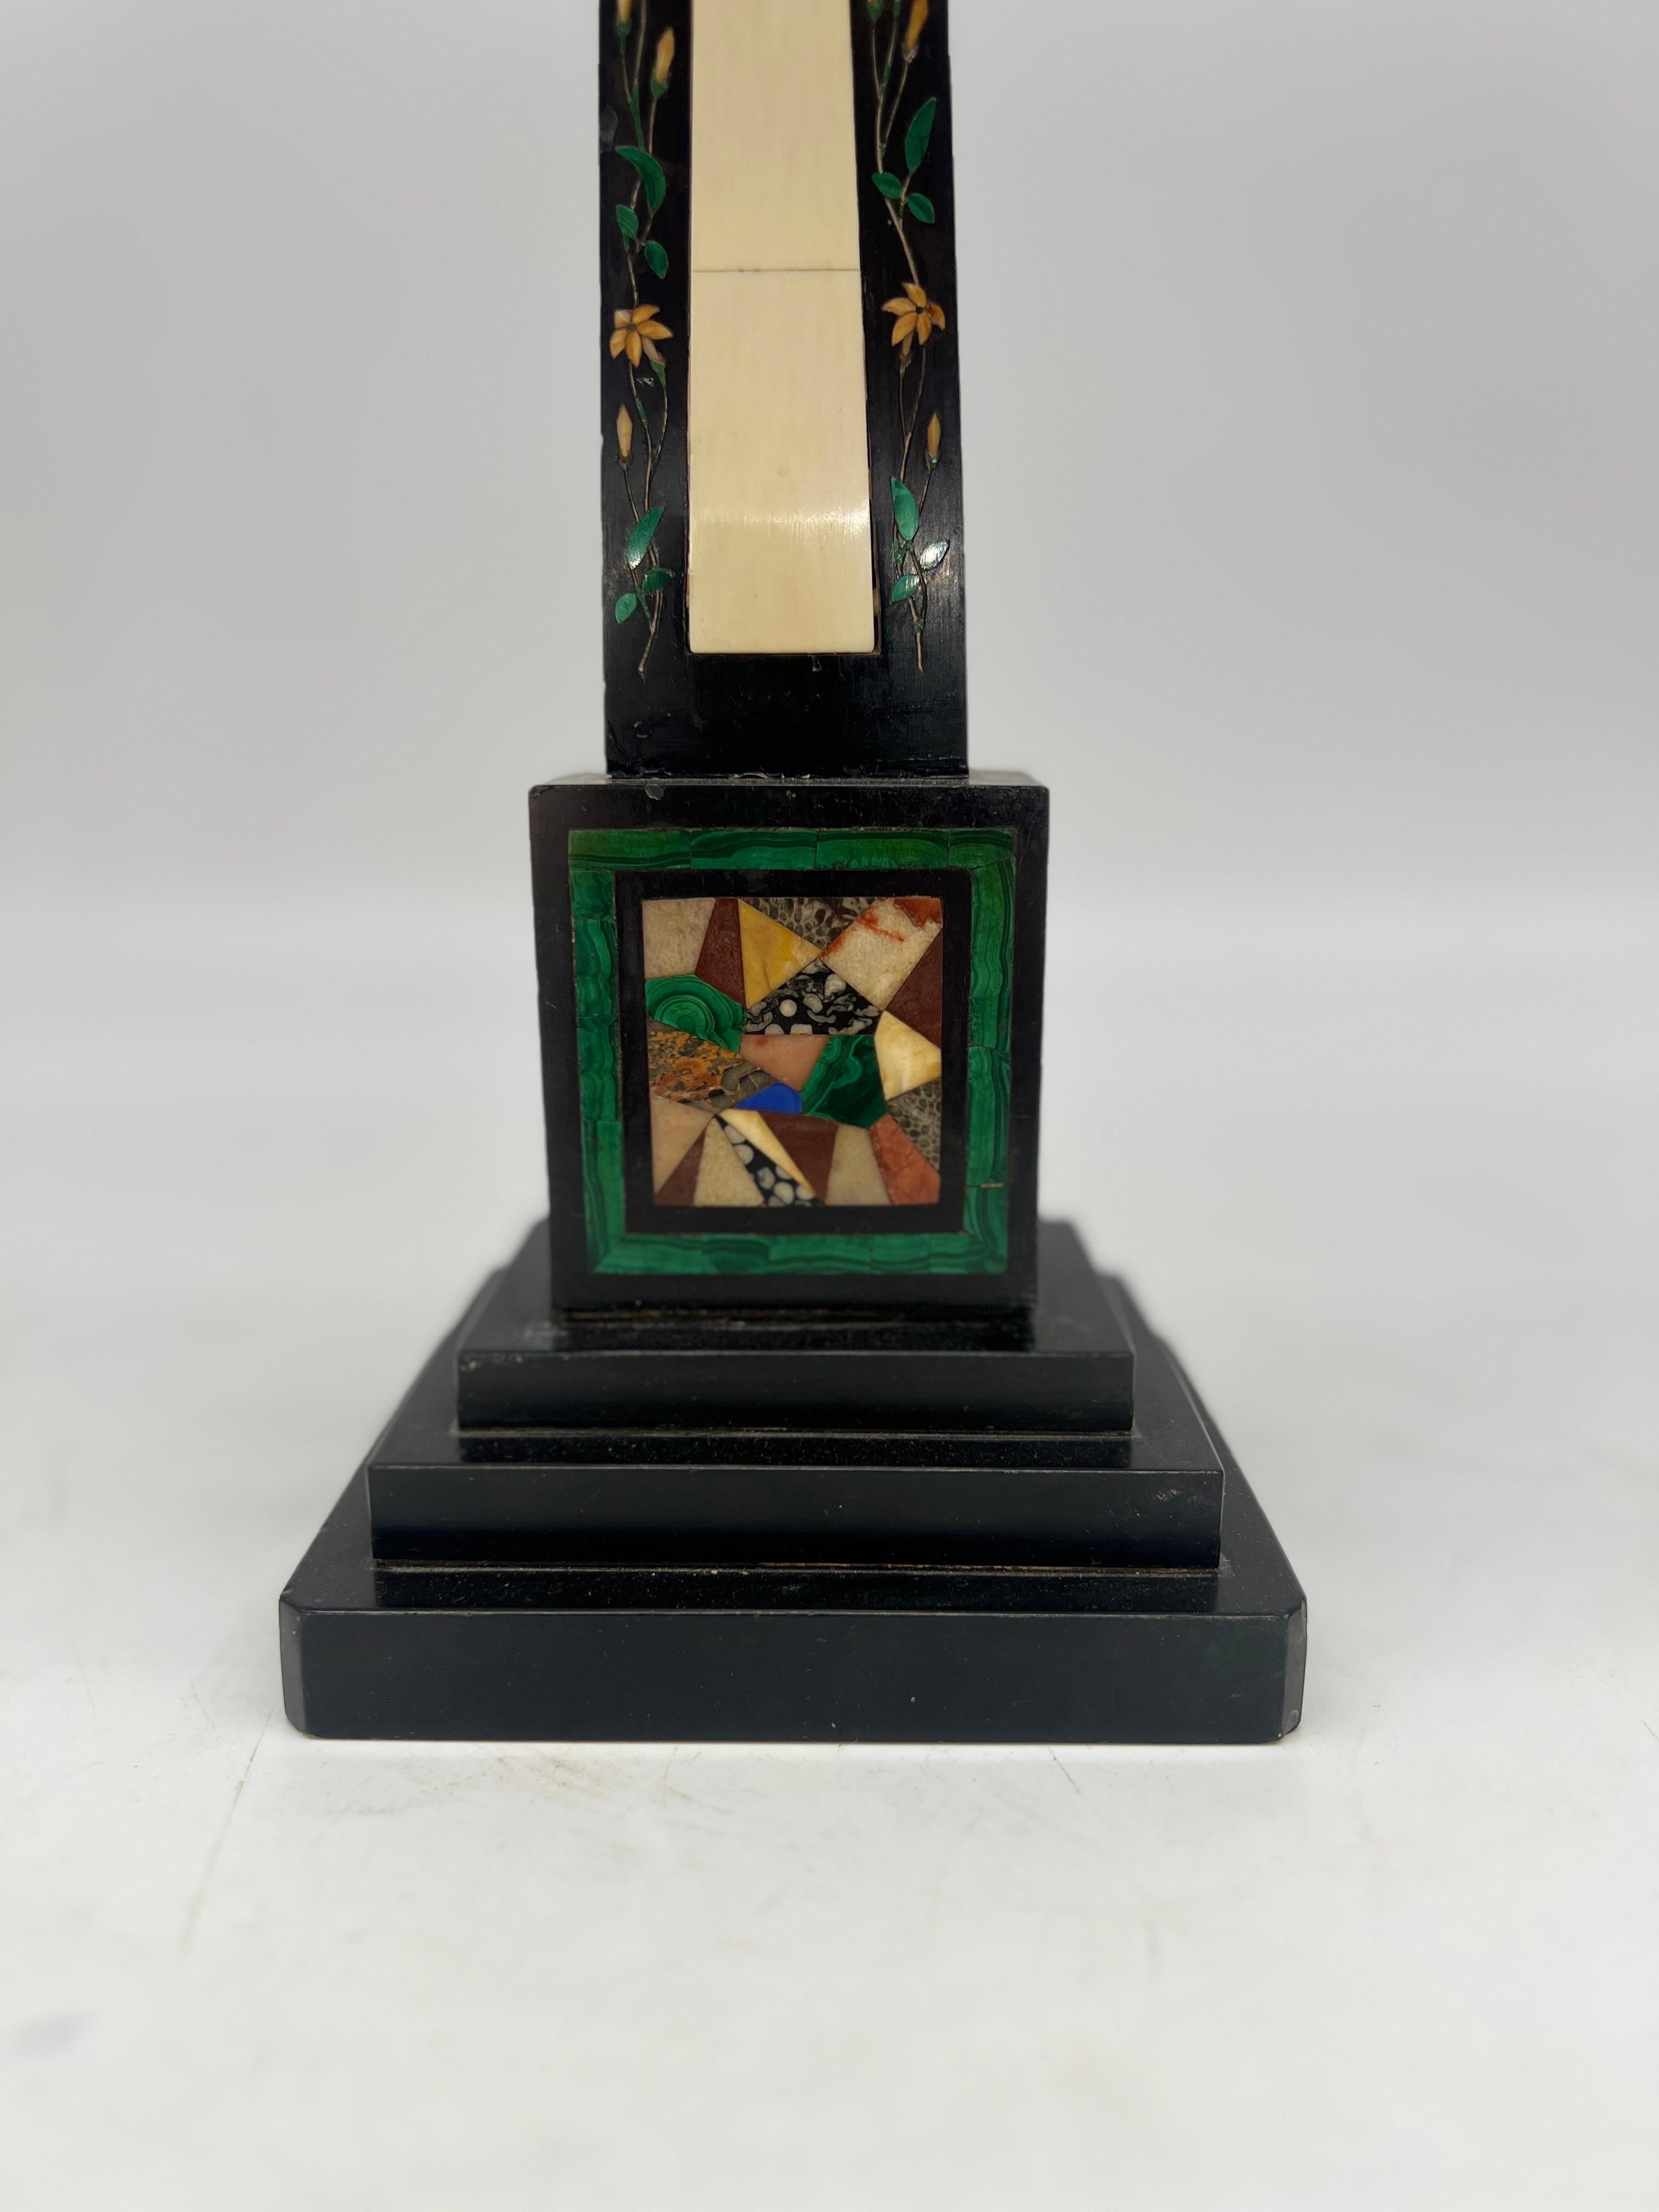 Continental, 19th century.

A grand tour era (possibly Italian) obelisk constructed with a stepped black marble square base, a highly decorated mixed material stem which consists of malachite, lapis, granite, marble and other semi-precious stones.